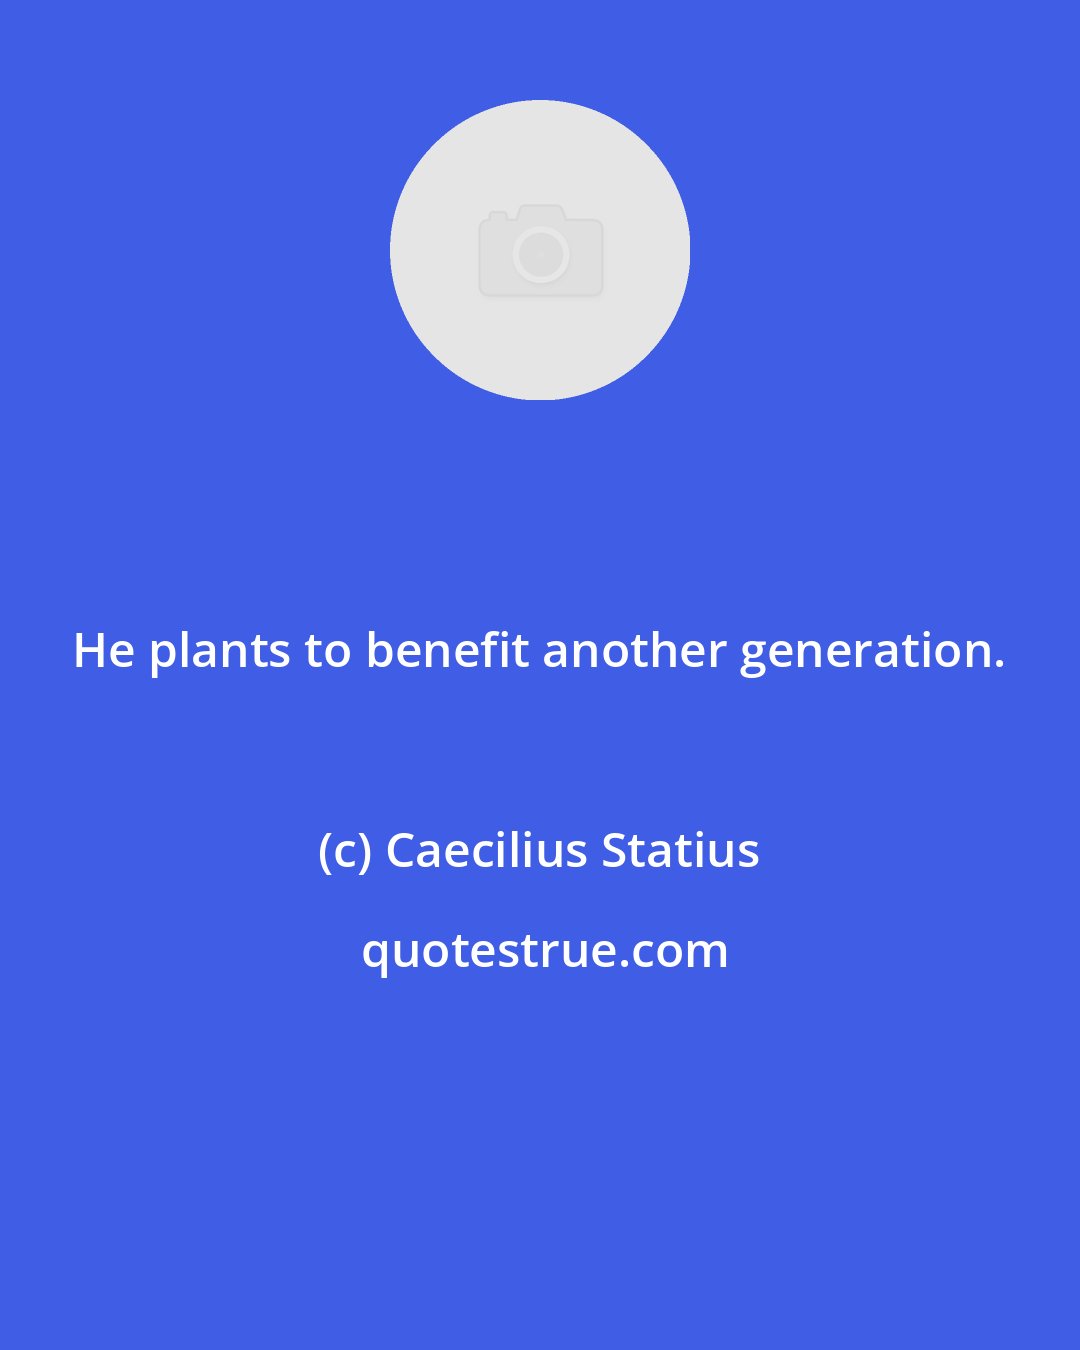 Caecilius Statius: He plants to benefit another generation.